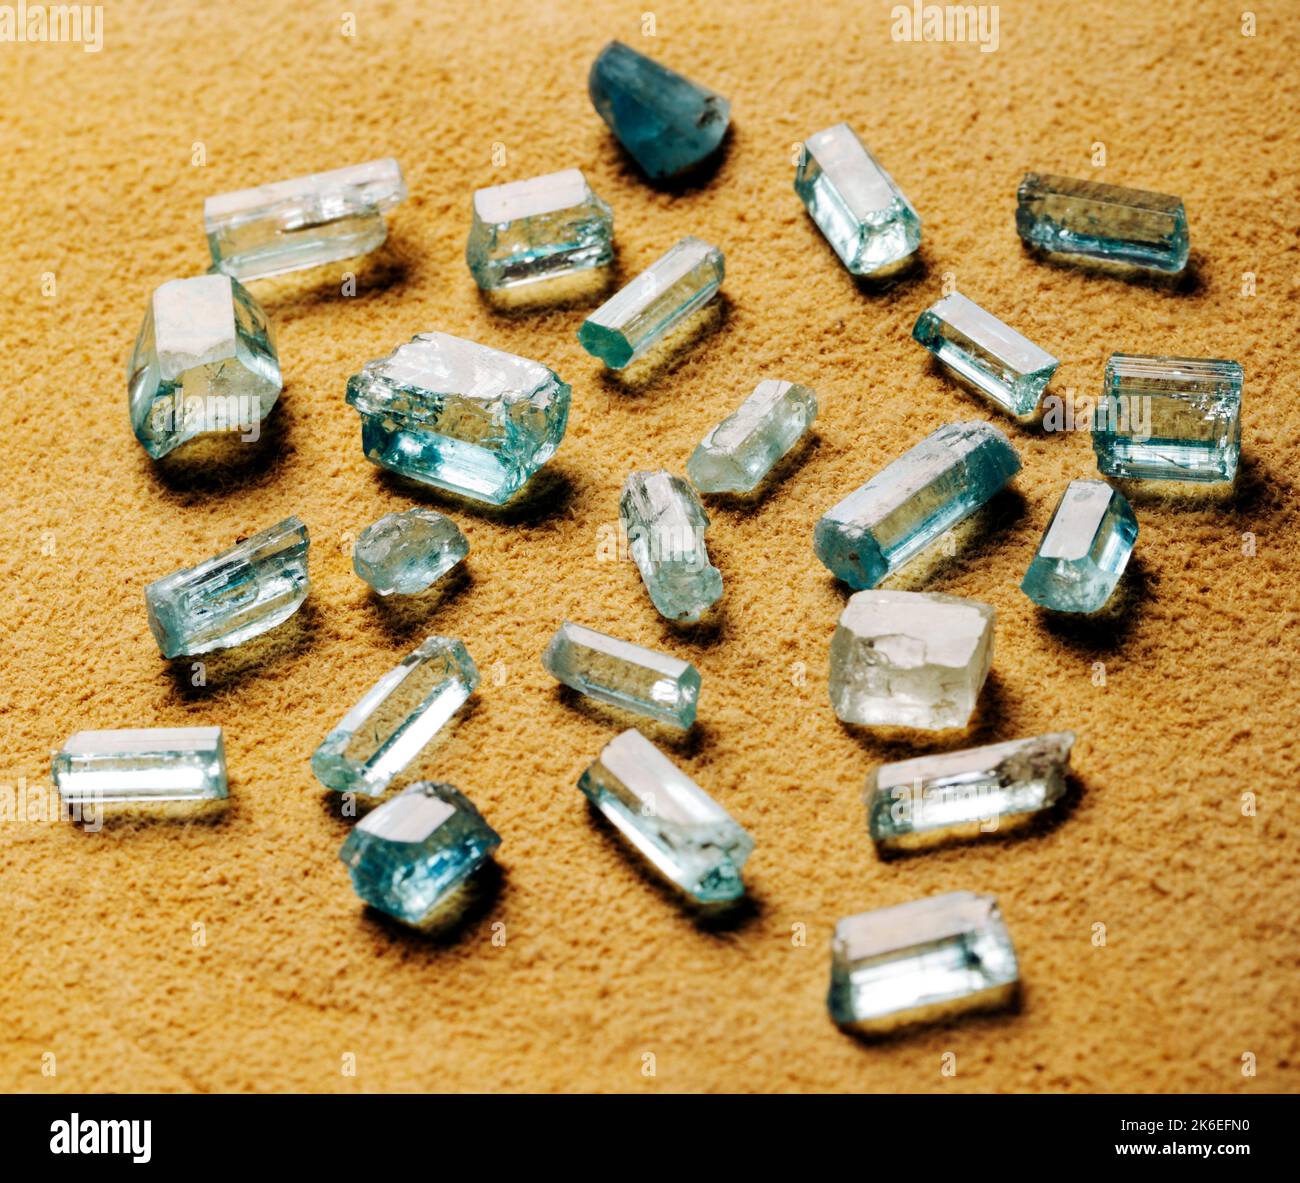 Aquamarine gemstones mined by famous prospector; Brian Busse; American Gemtracker; Colorado; USA Stock Photo